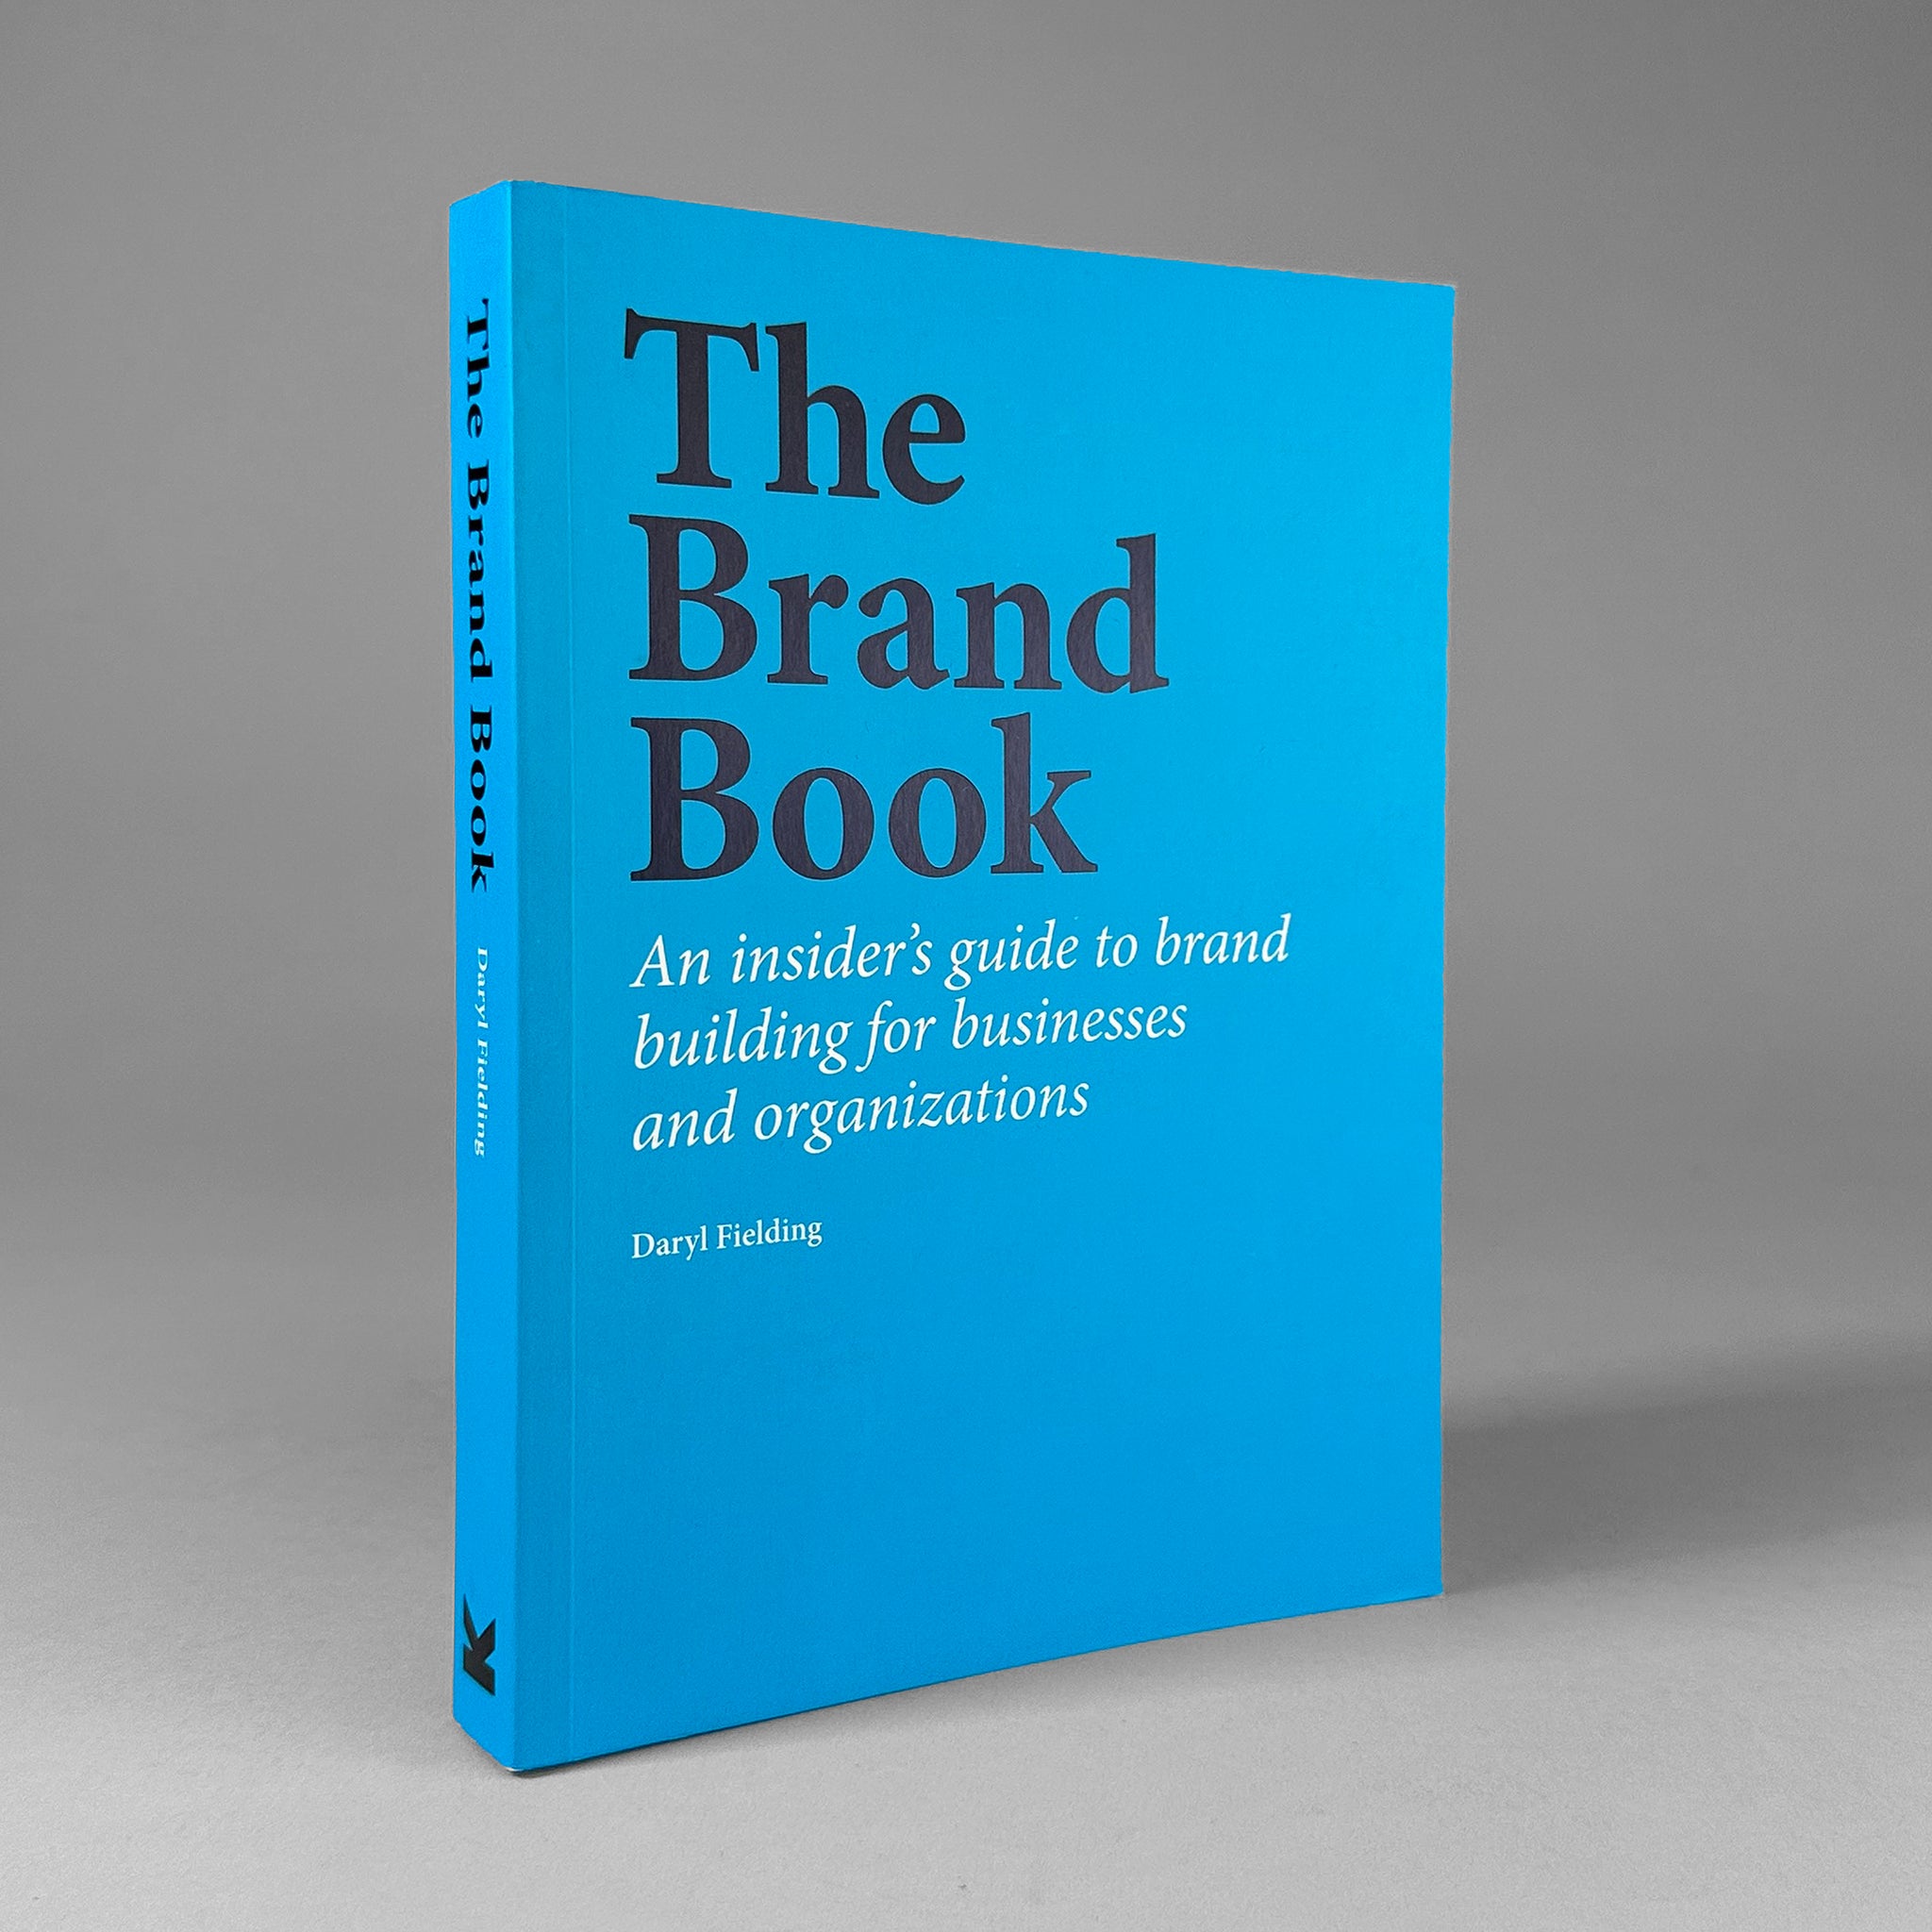 The Brand Book: An Insider’s Guide to Brand Building for Businesses and Organizations